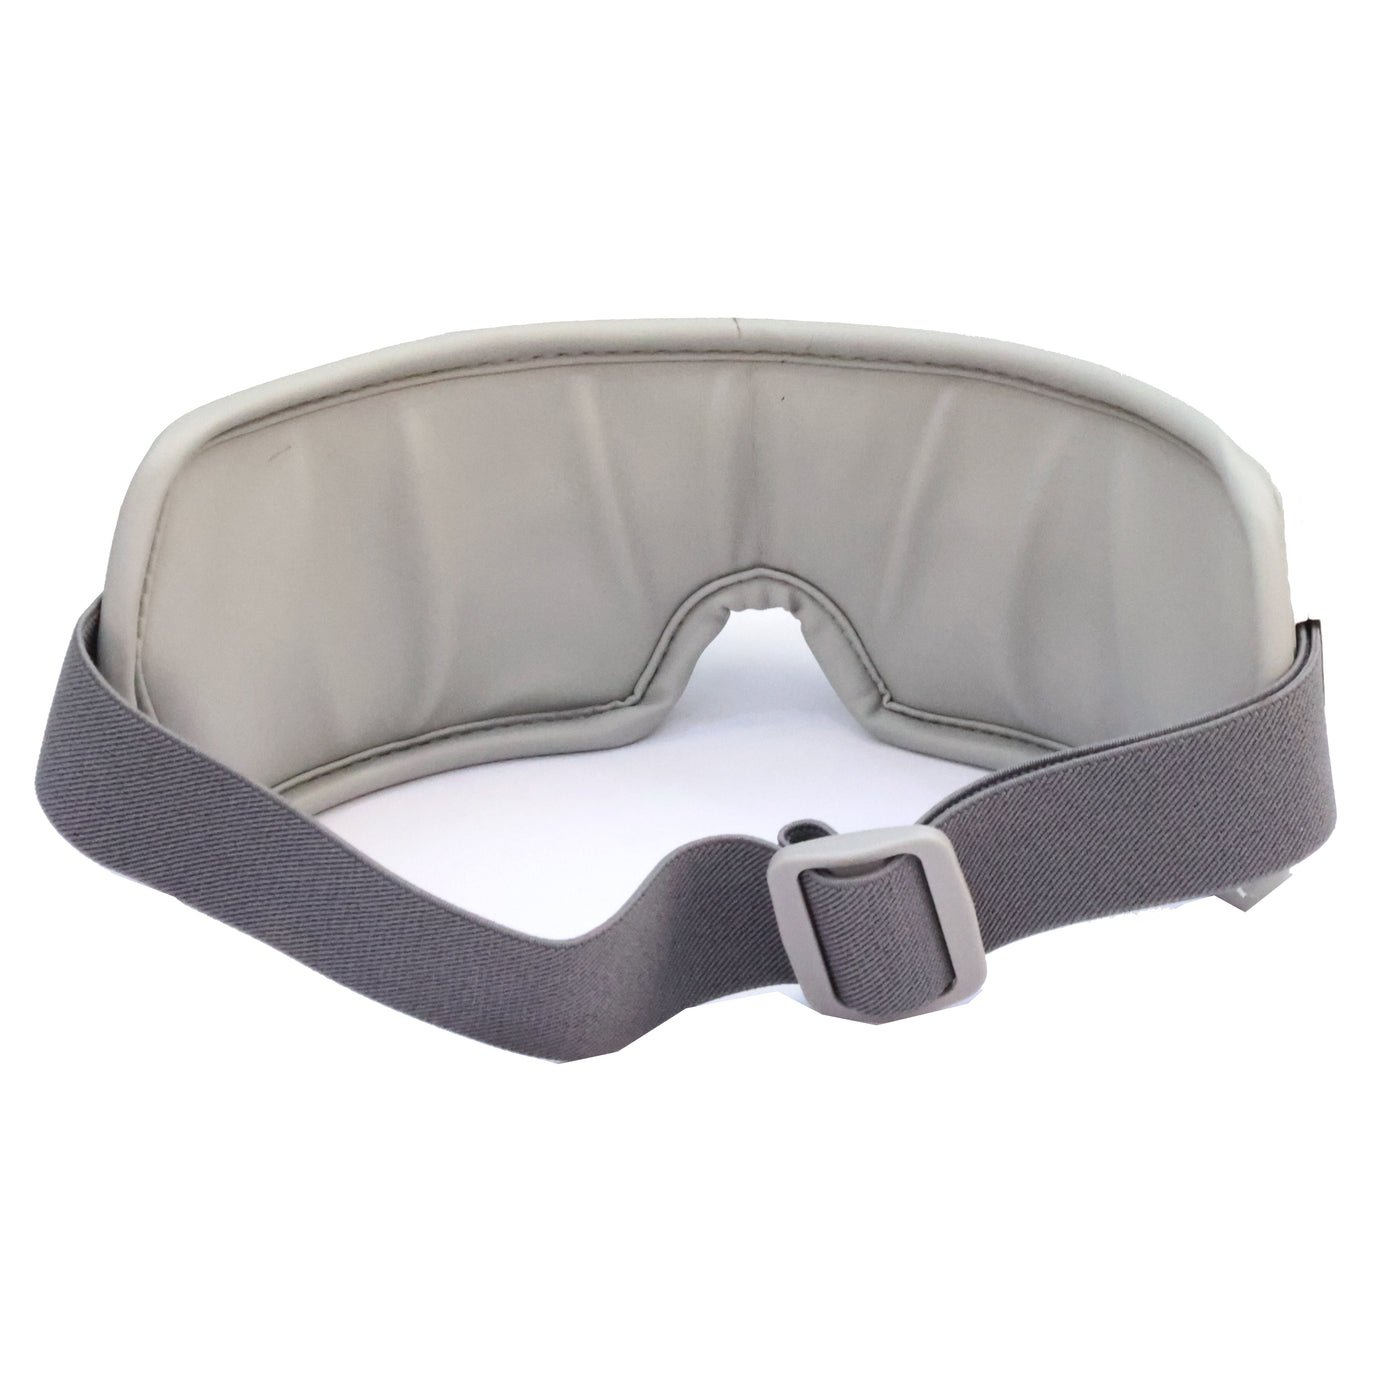 Heated eye & temple massage mask with Compression, Bluetooth, Electric Temple Massager